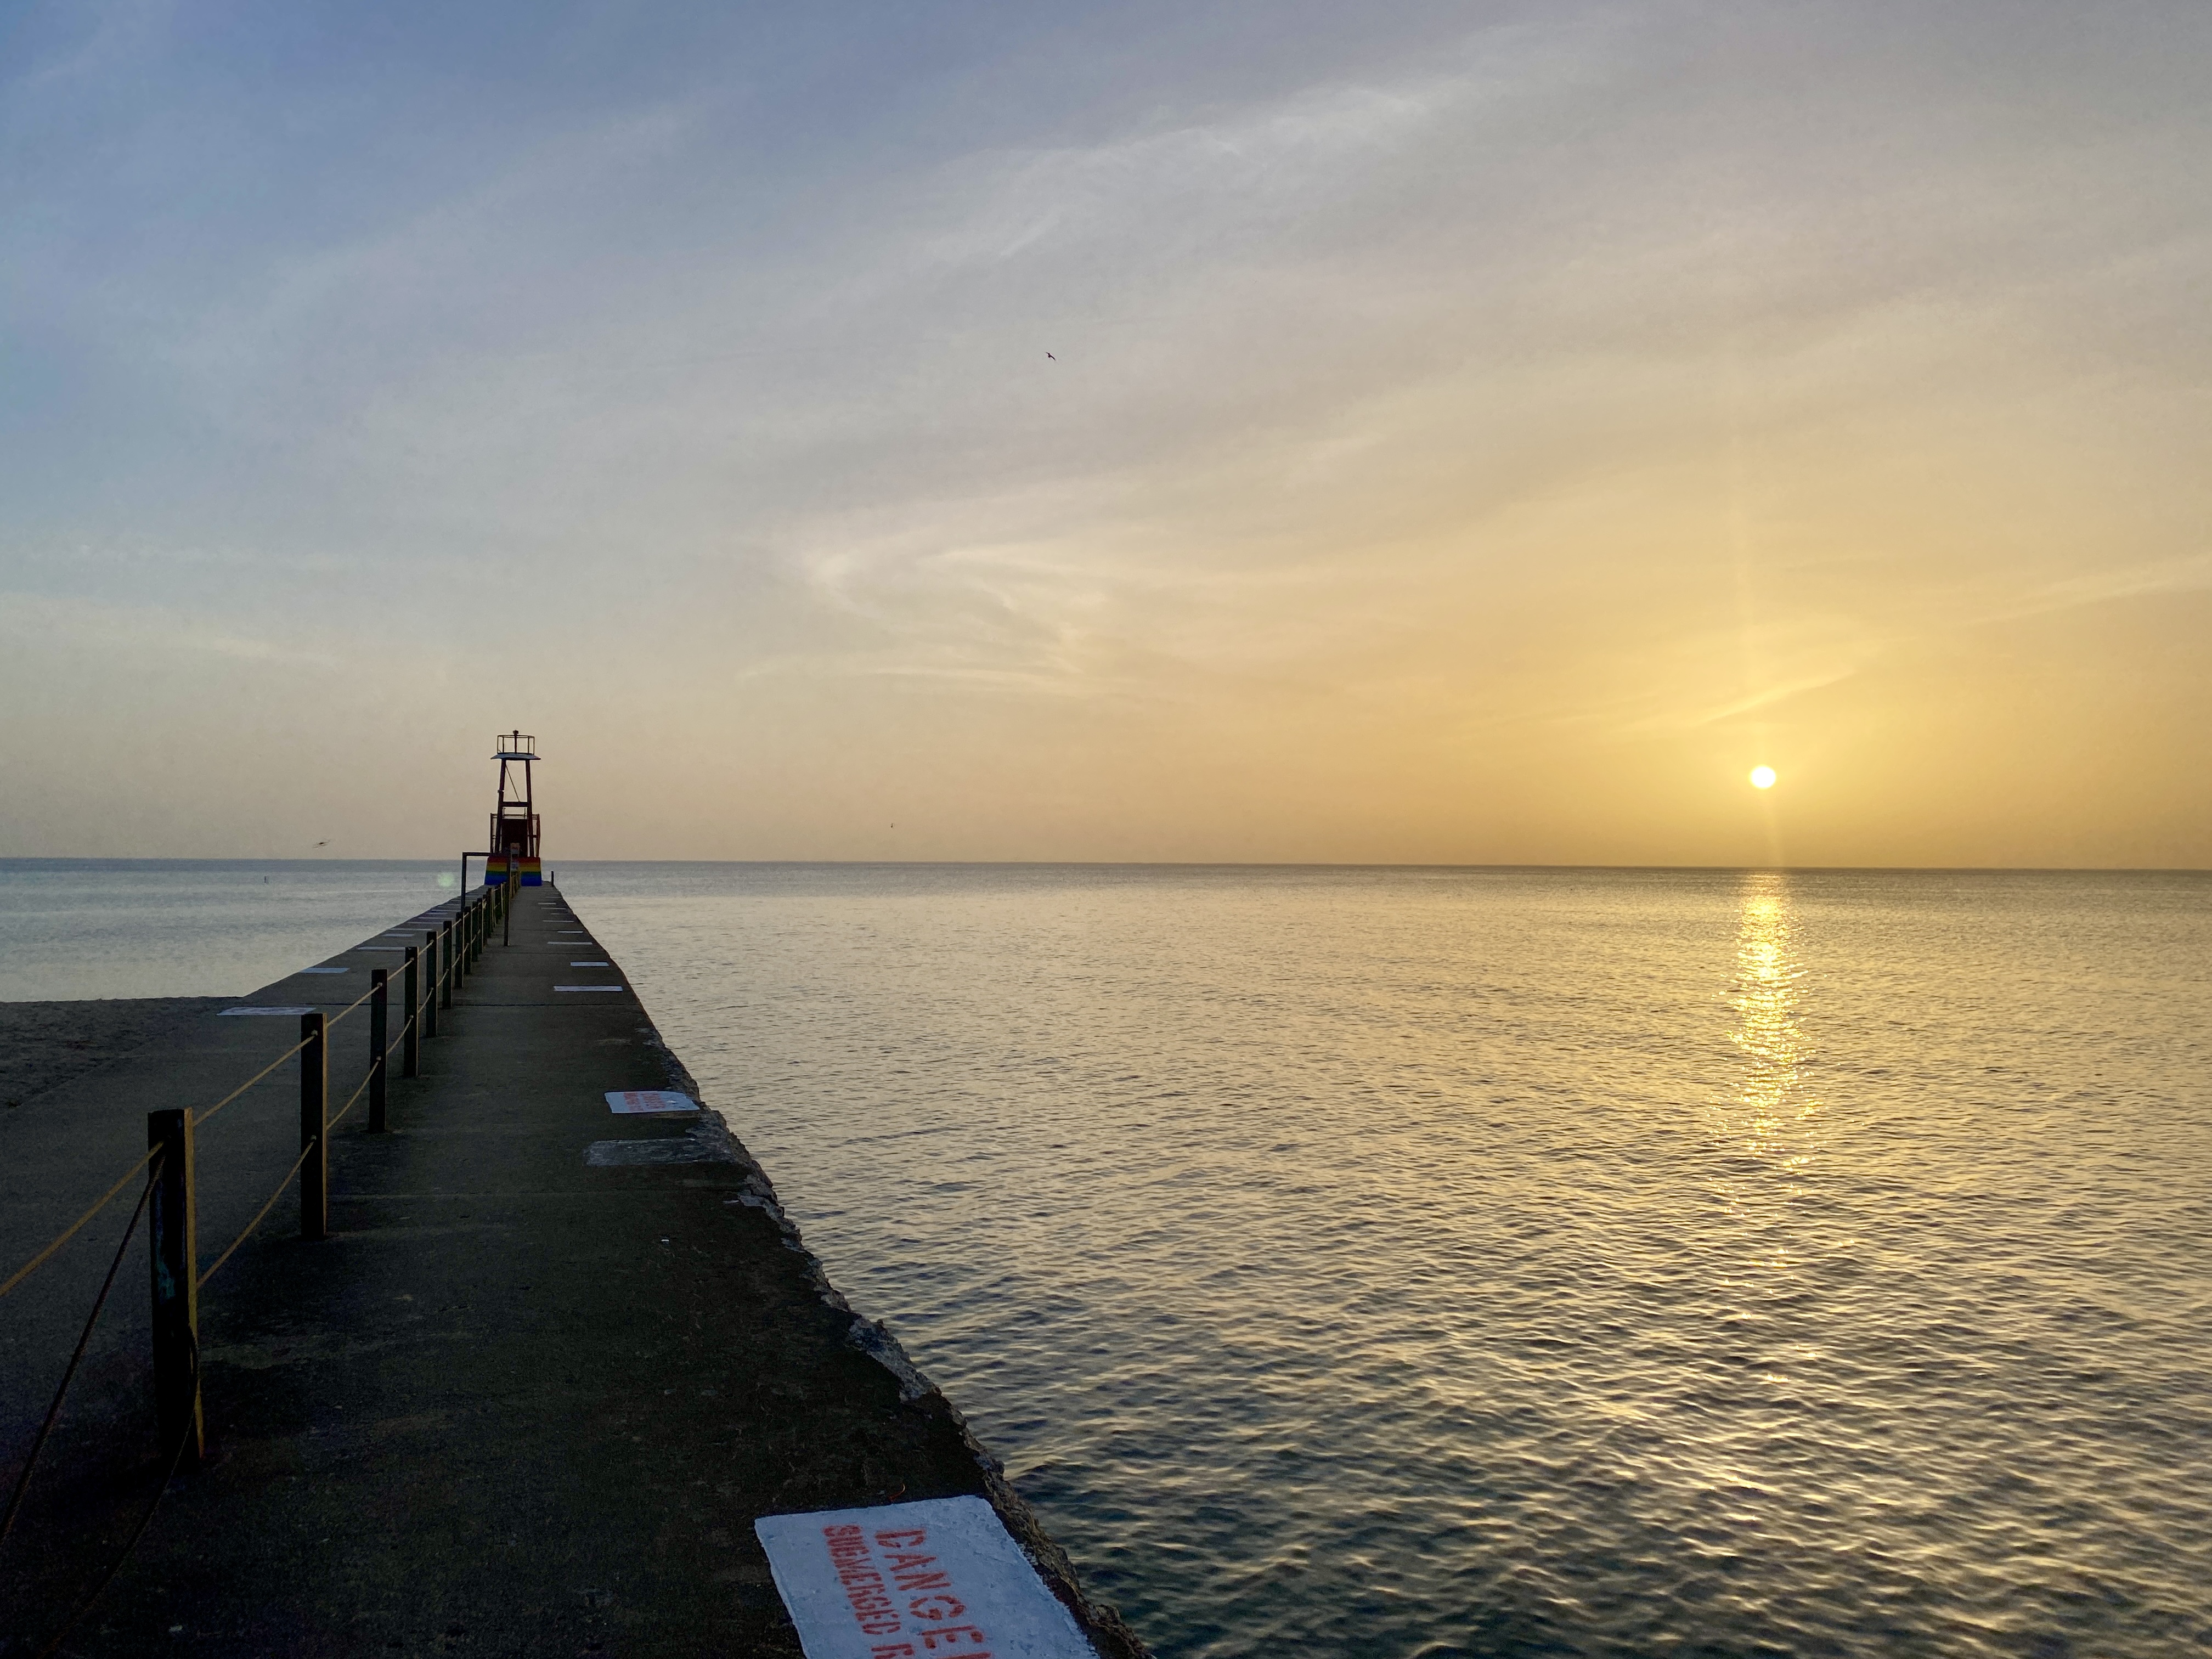 Horizon of a large lake, a narrow concrete pier jutting out to the left and a sun rising to the right, the hazy sky and water tinted warm yellow